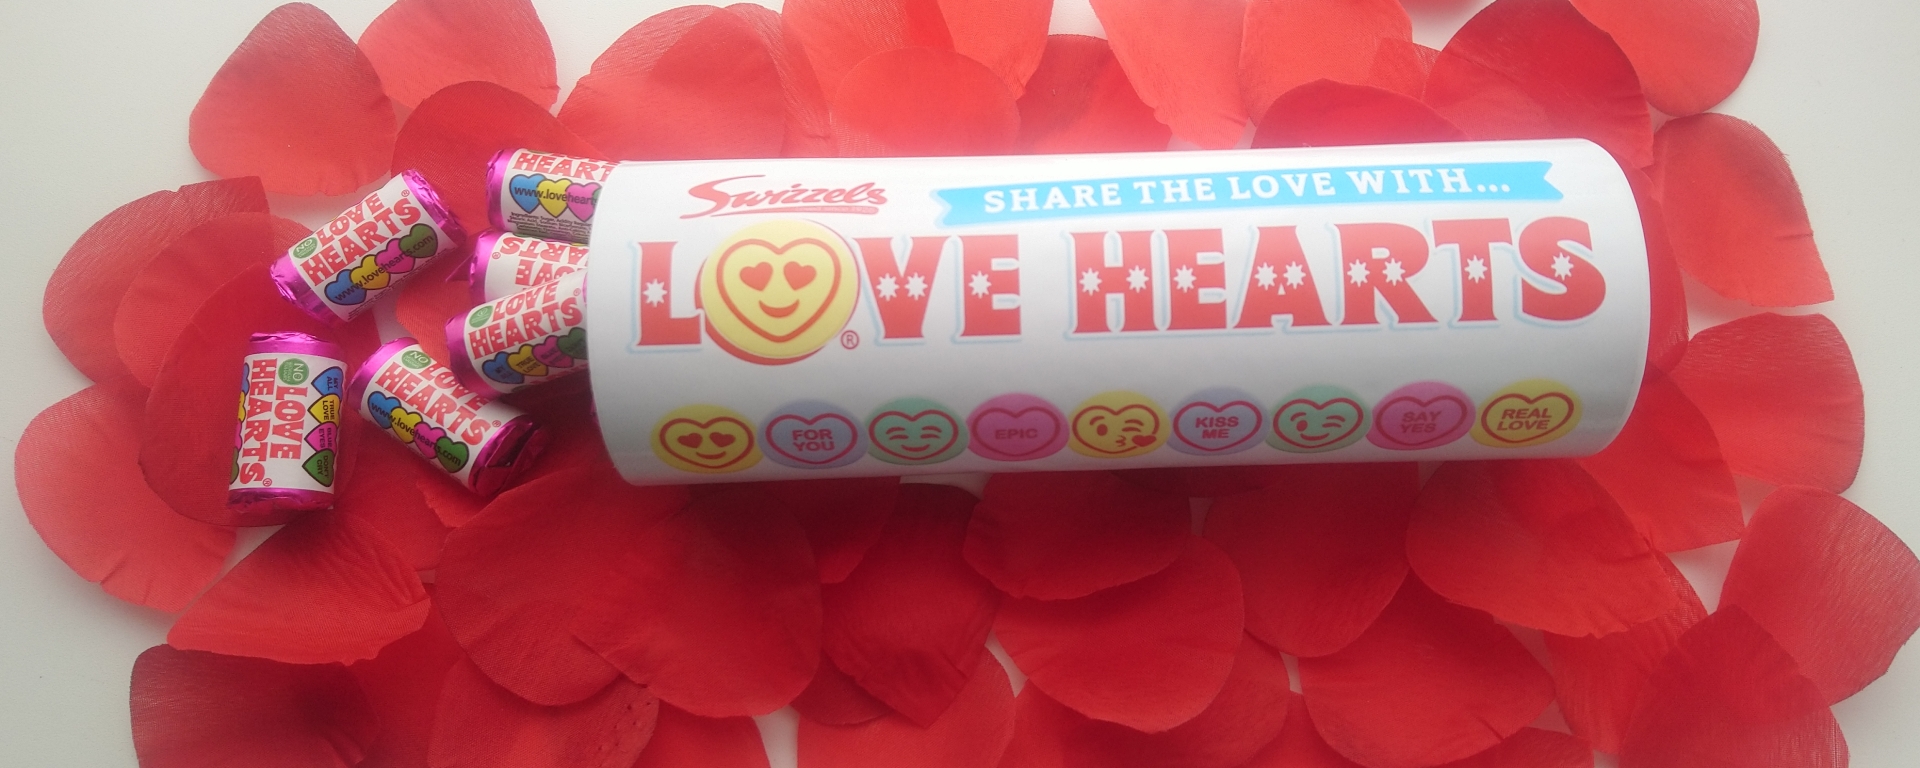 A tube of sweets on a bed of rose petals, with some packets of sweets pouring out.